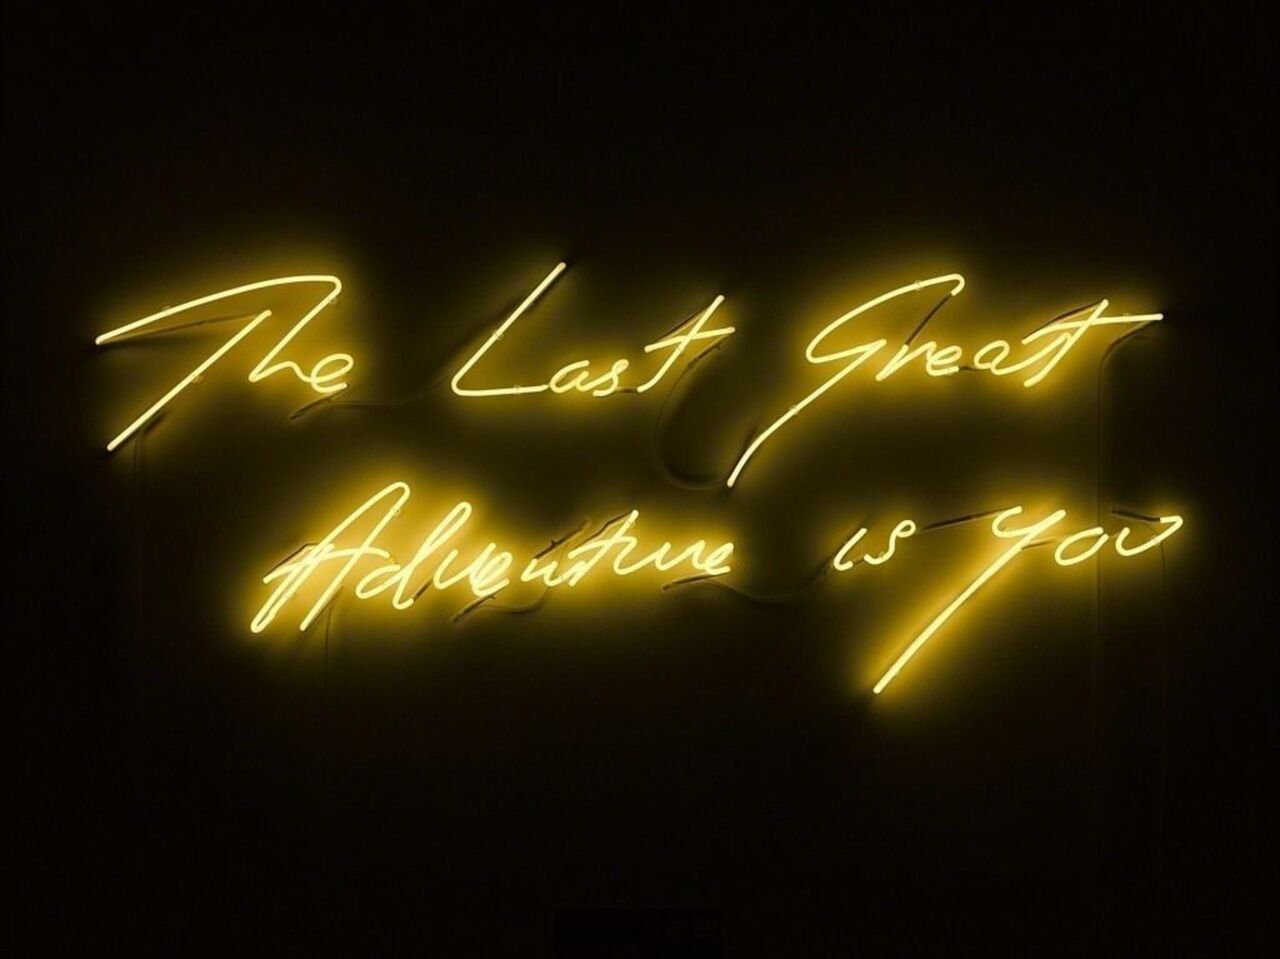 "Art is like a lover whom you run away from but who comes back and picks you up." - Tracey Emin (The Last Great Adventure Is You, '13, Neon) https://t.co/H4znB9JNiX